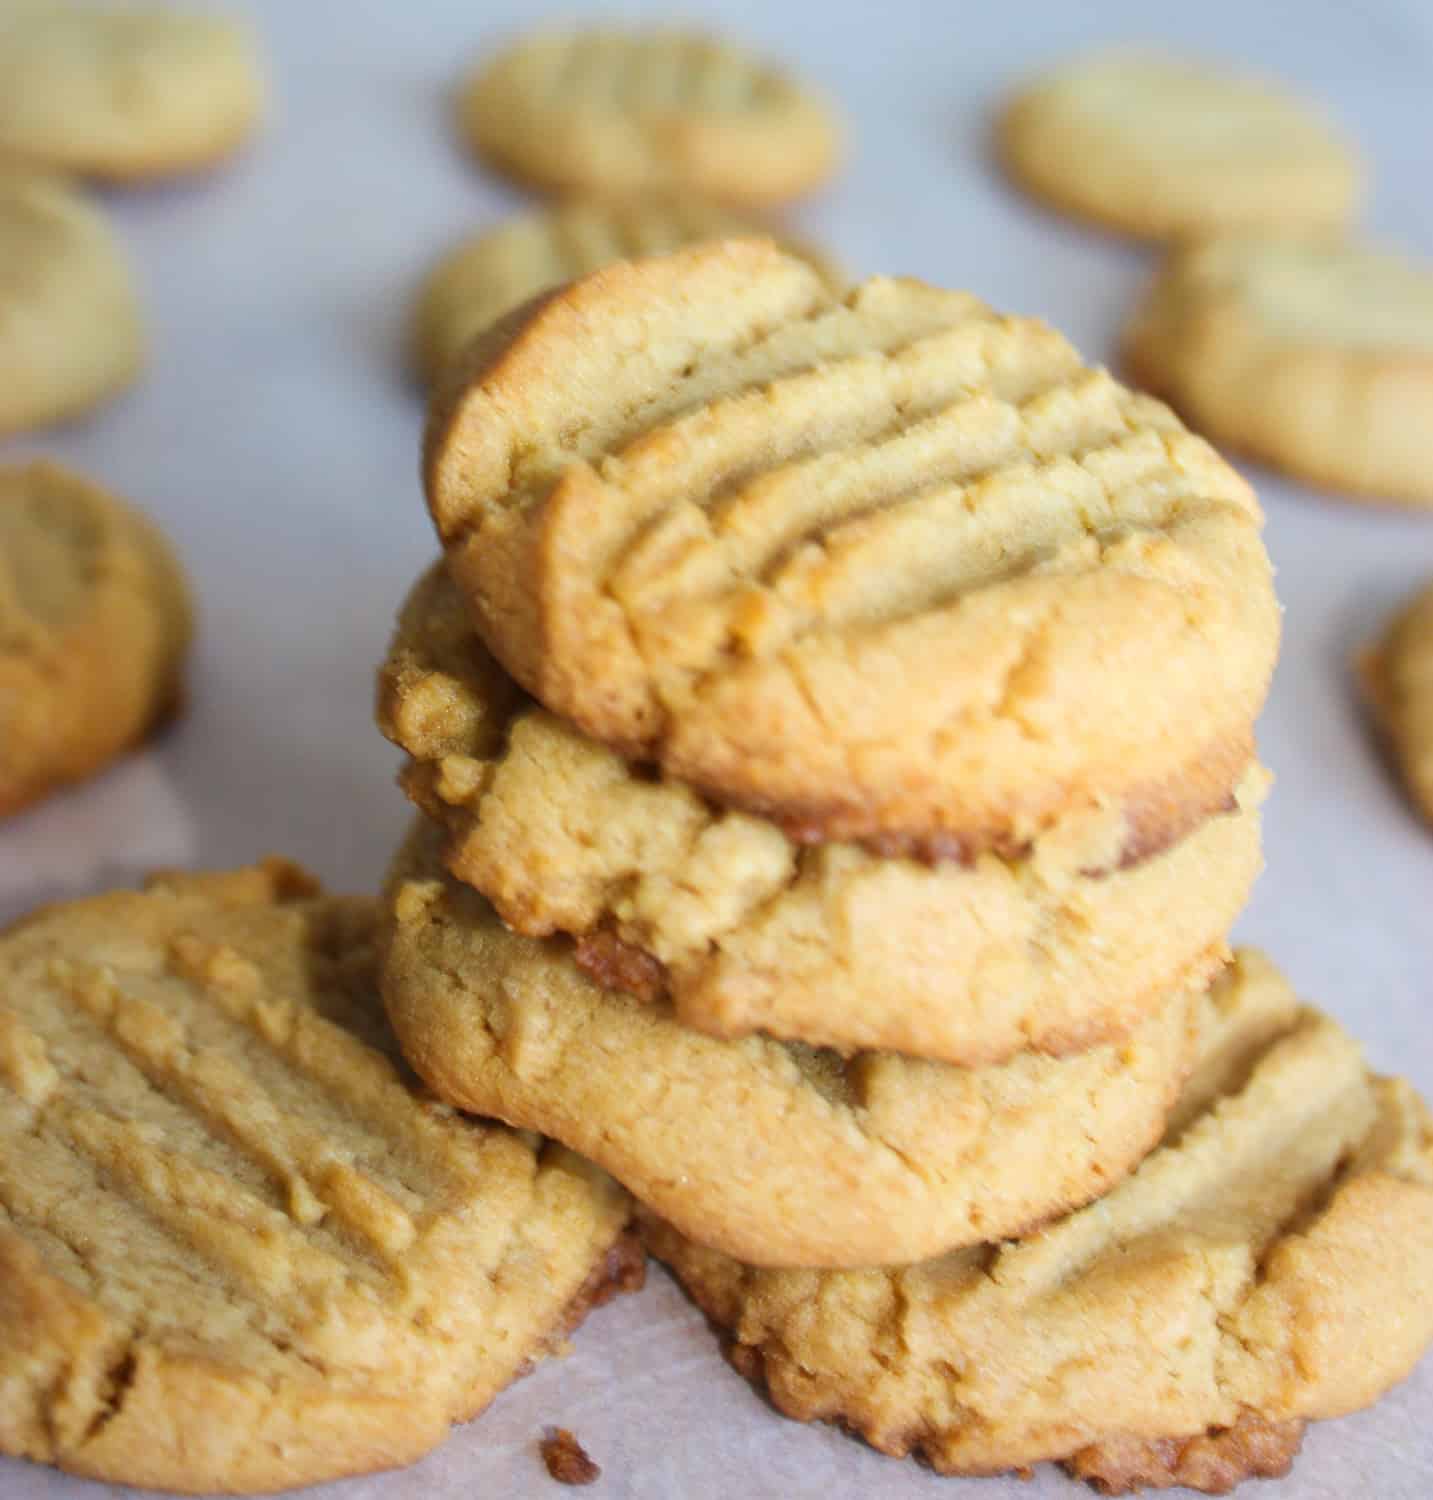 Peanut Butter Cookies are a classic that I really missed when I had to start eating gluten free. <span class="" style="display:block;clear:both;height: 0px;border-top-width:0px;border-bottom-width:0px;"></span>  This gluten free version really hits the spot and satisfies that peanut butter cookie craving!